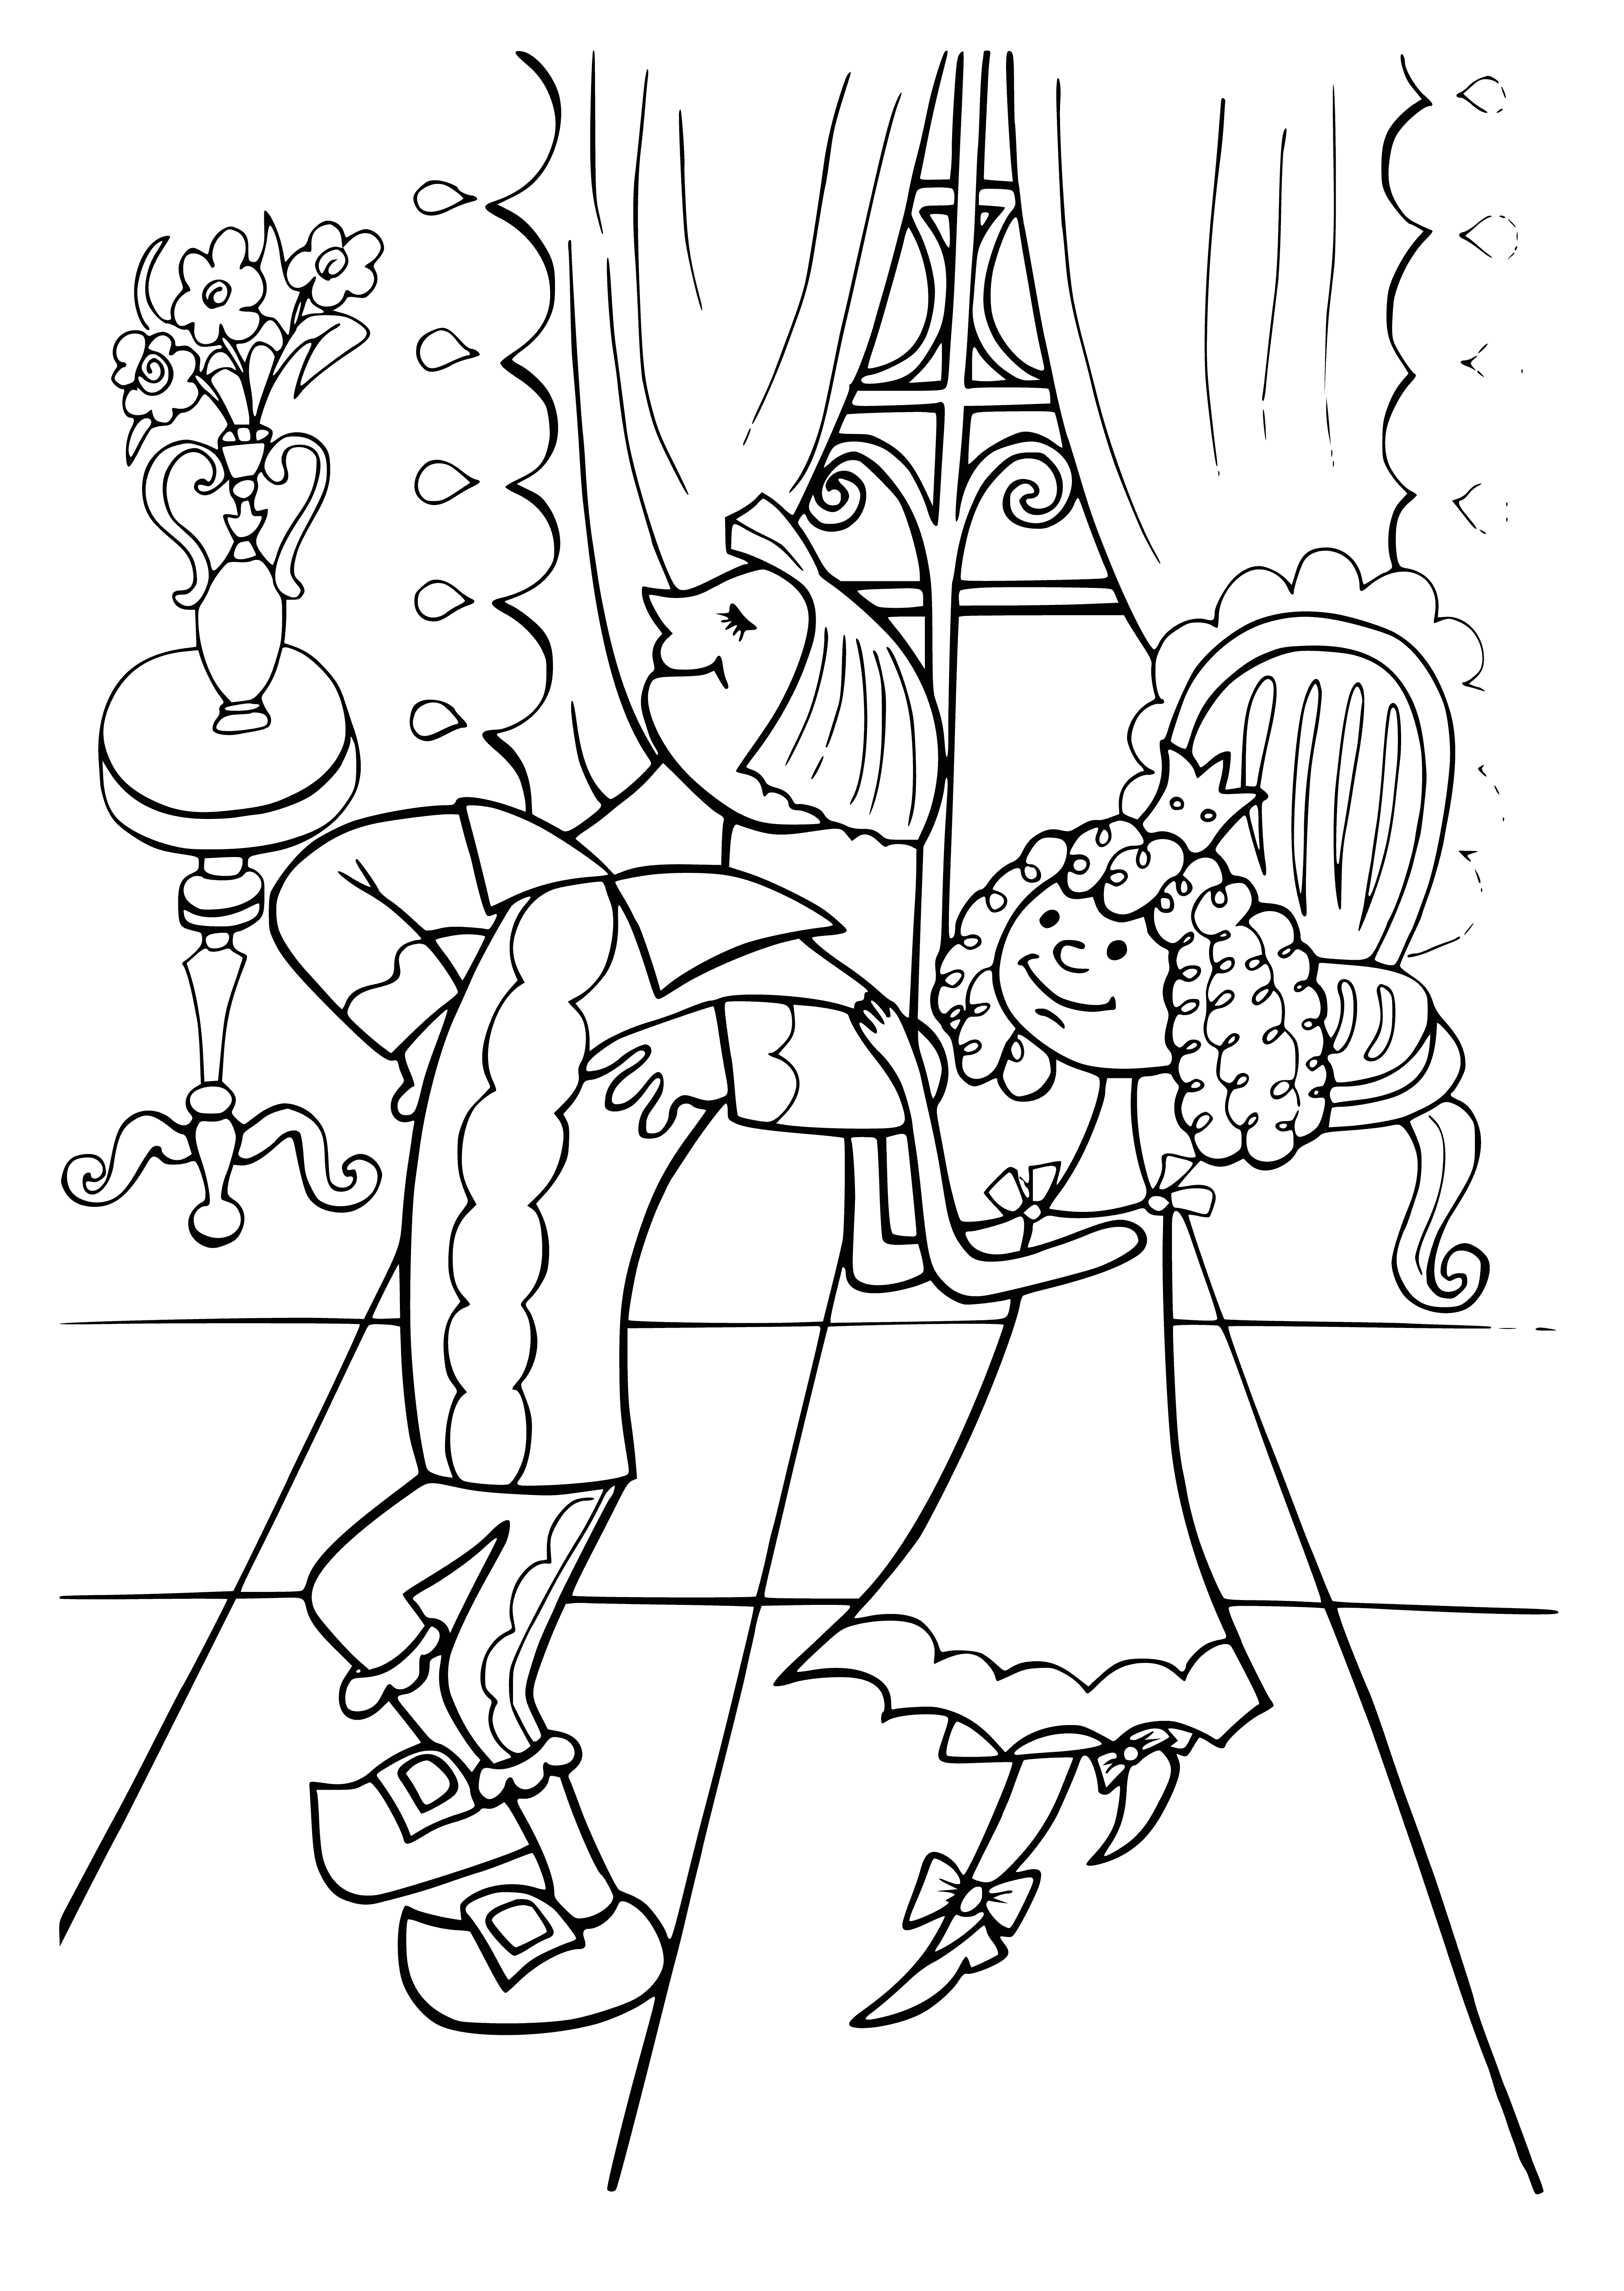 coloring page: Group in grand hall, woman with golden crown on throne flanked by man and small, sly cat with sword in mouth. At bottom, content orange cat.